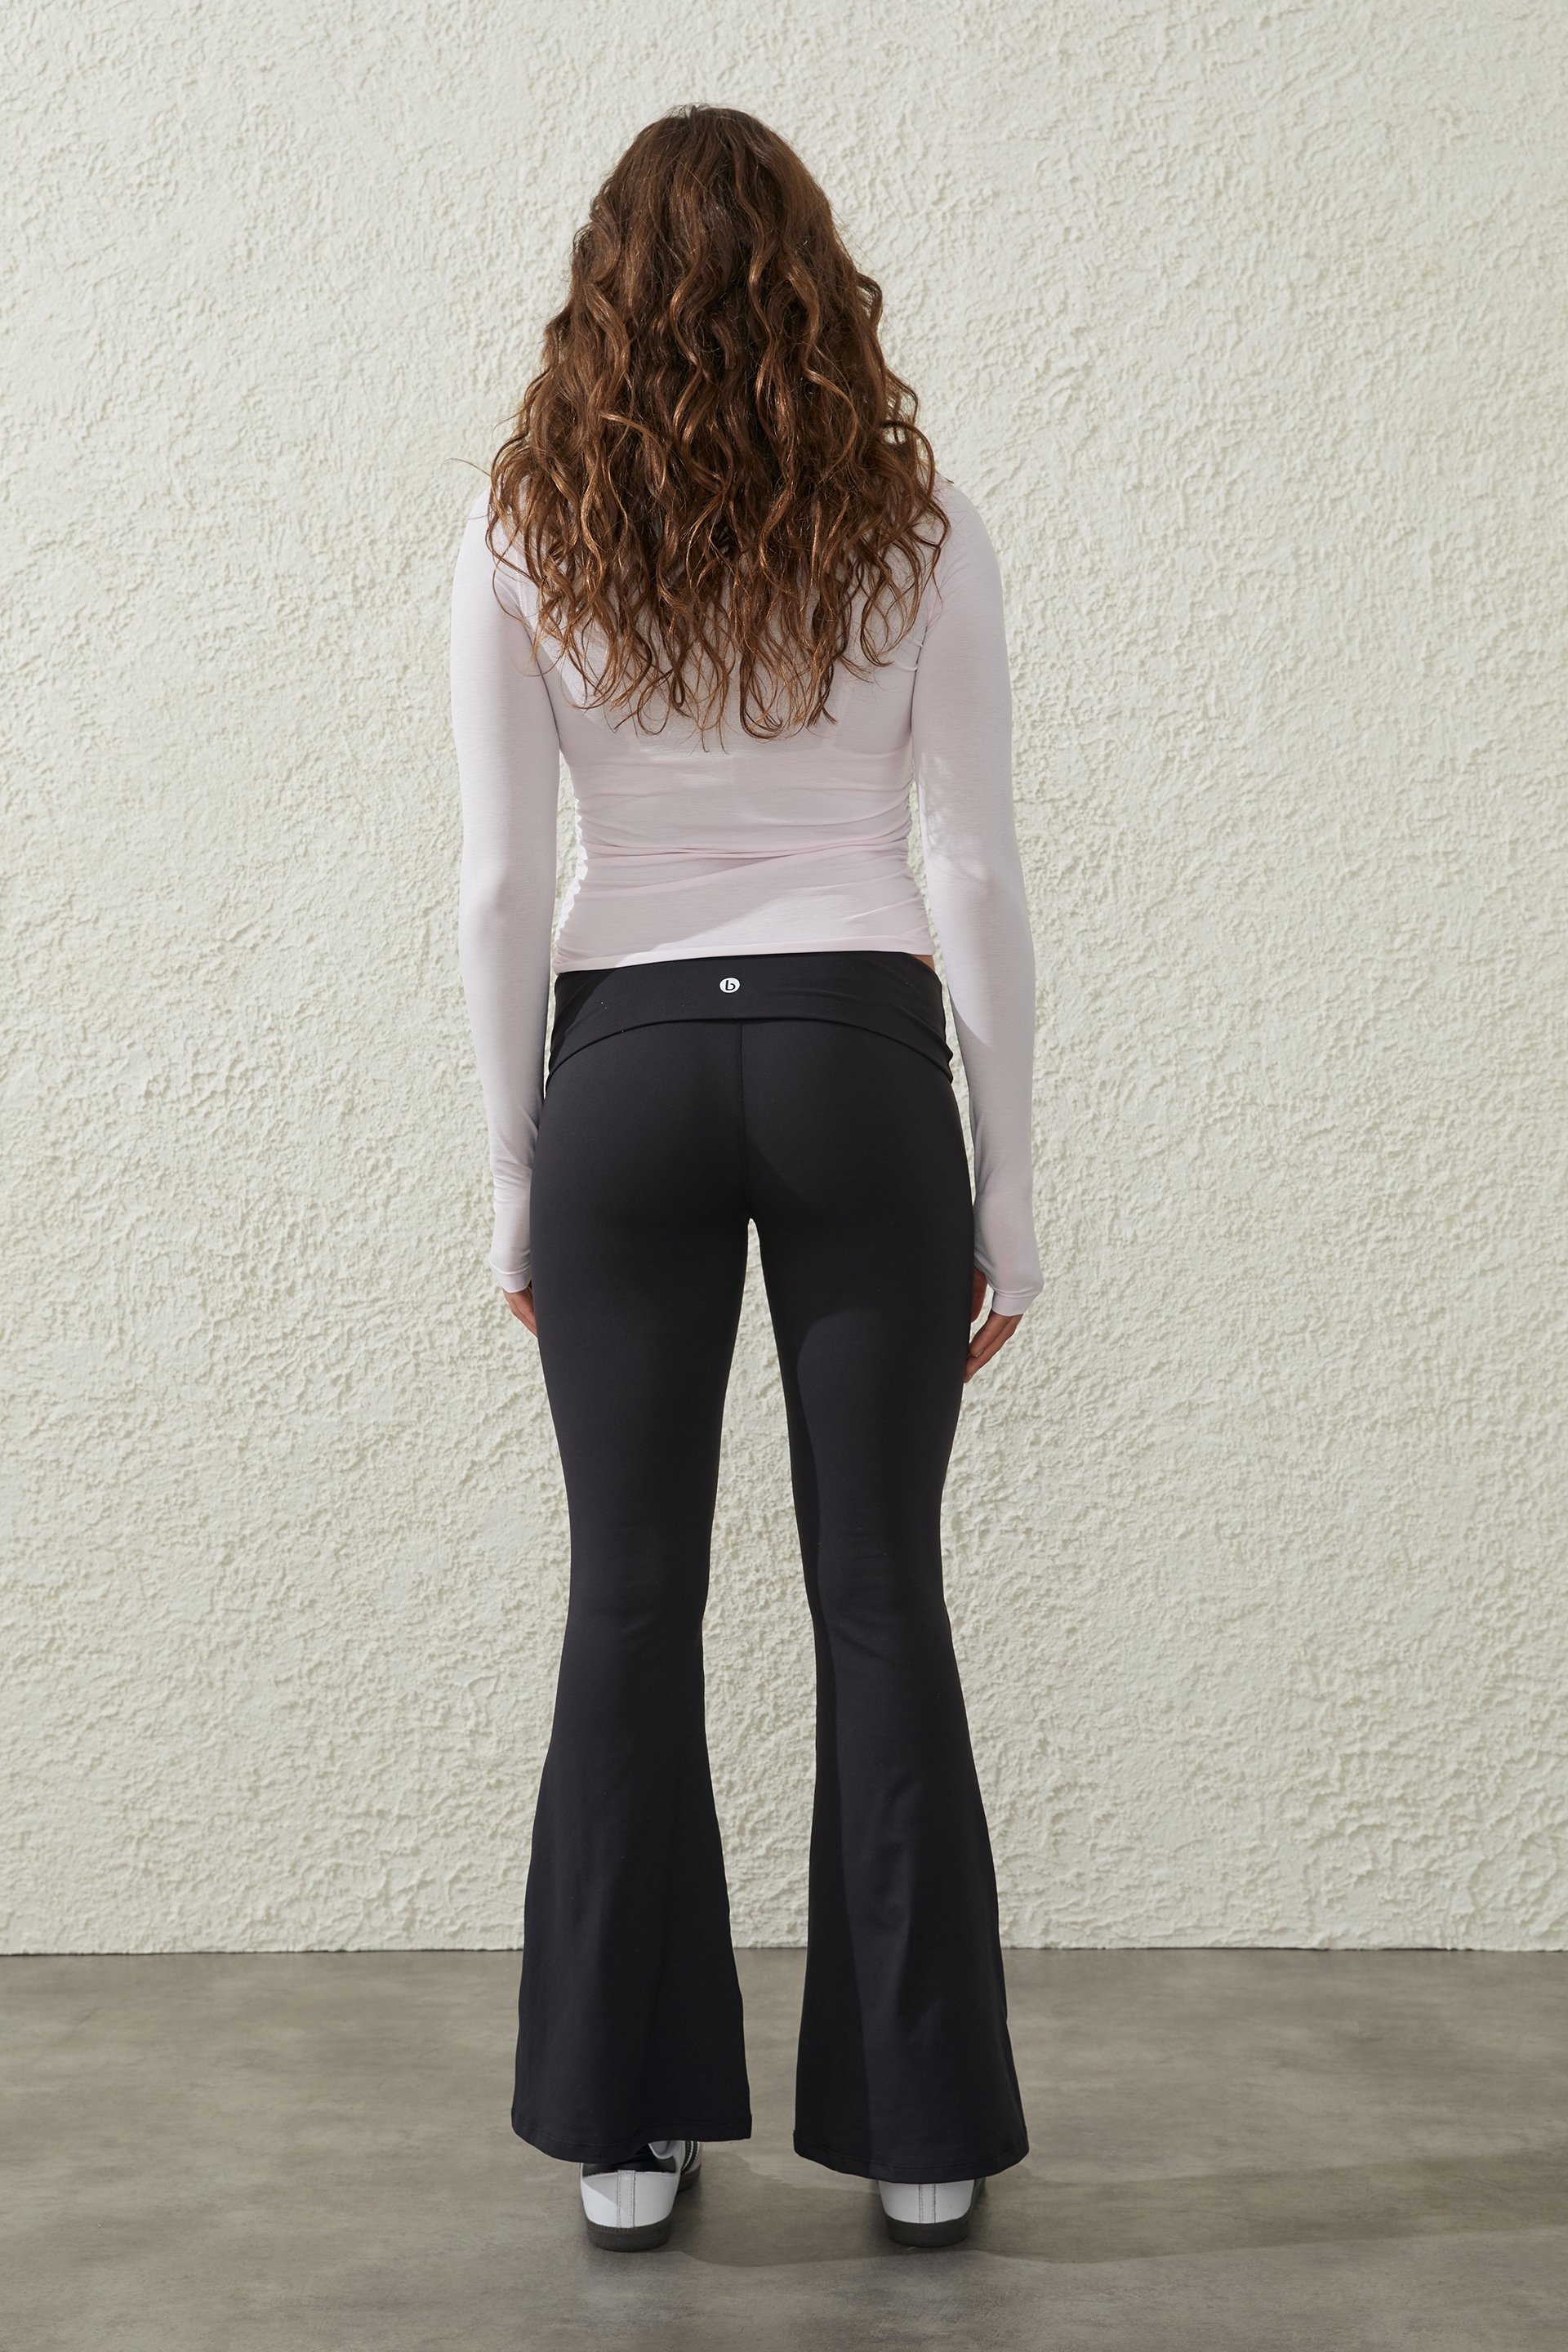 Cotton On Women's Ultra Soft Fold Over Flare Tight Pants